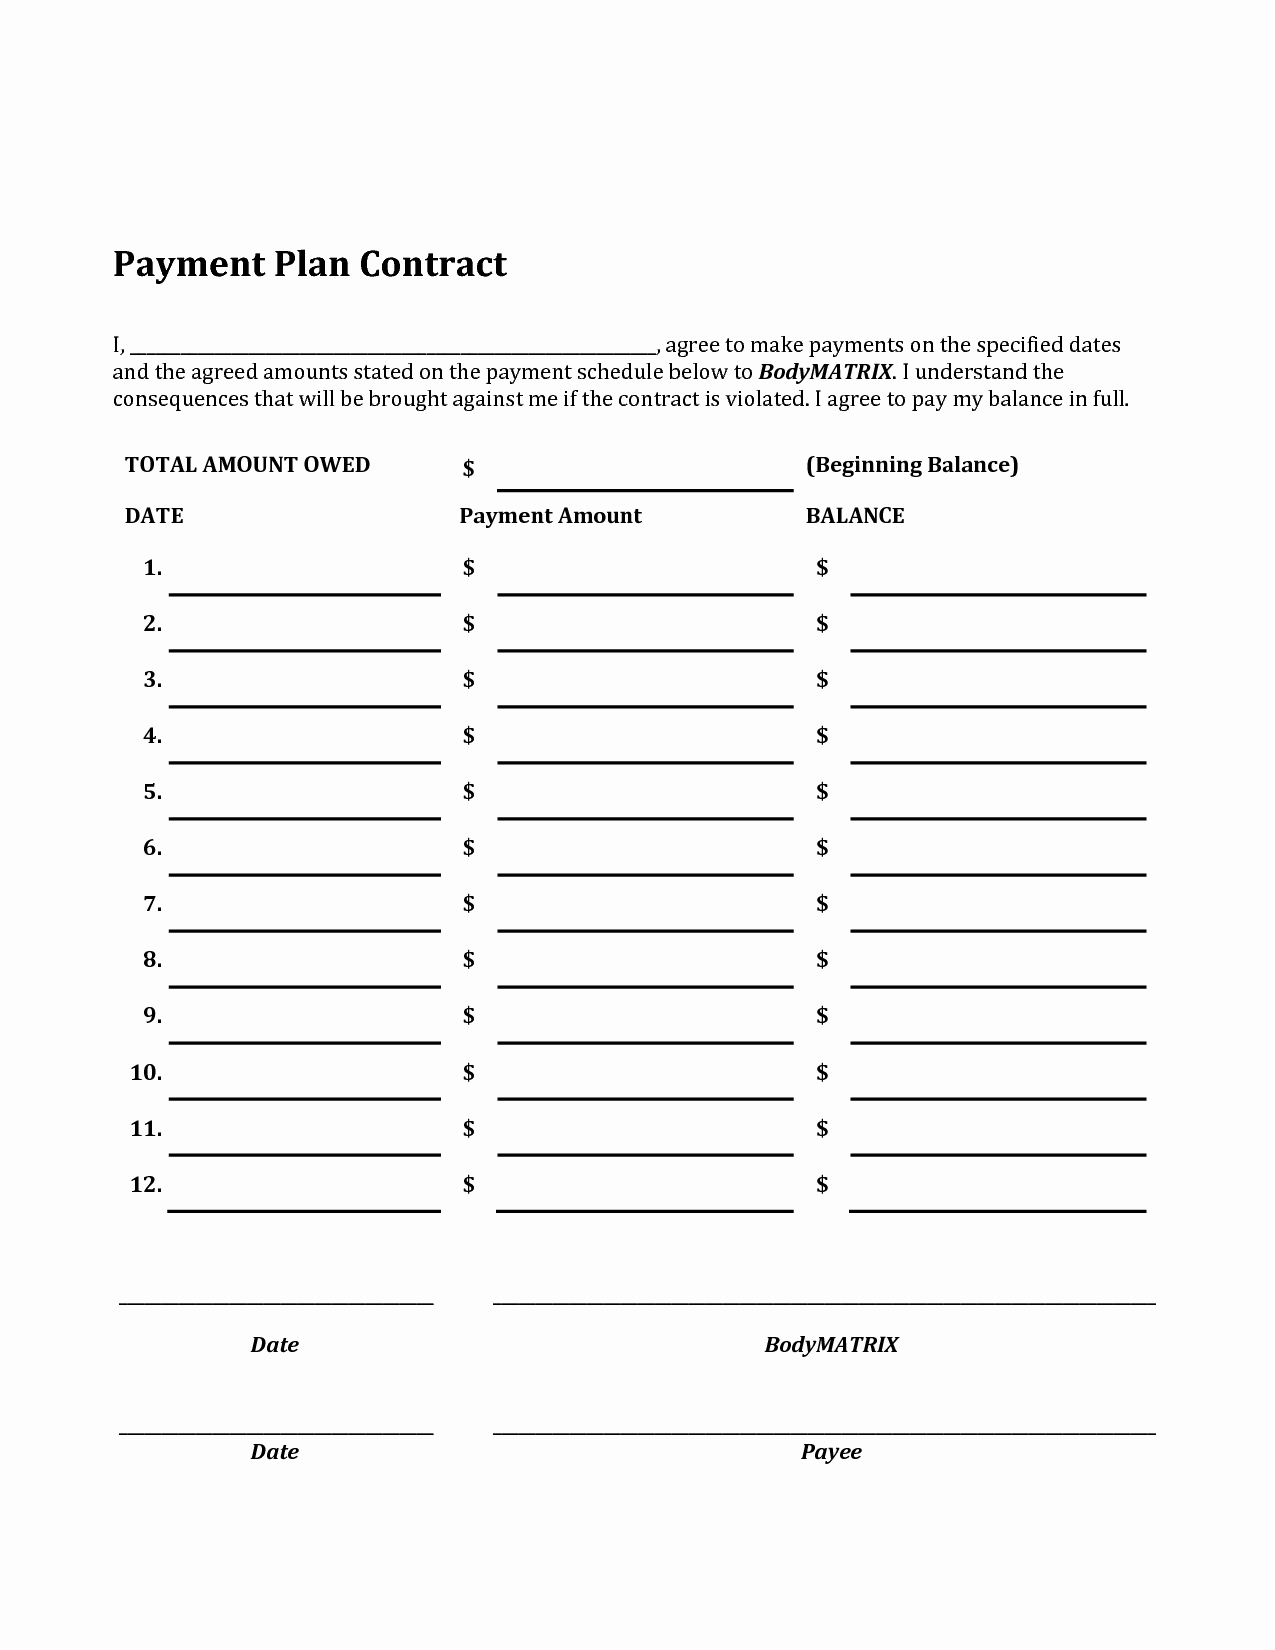 post payment plan agreement template